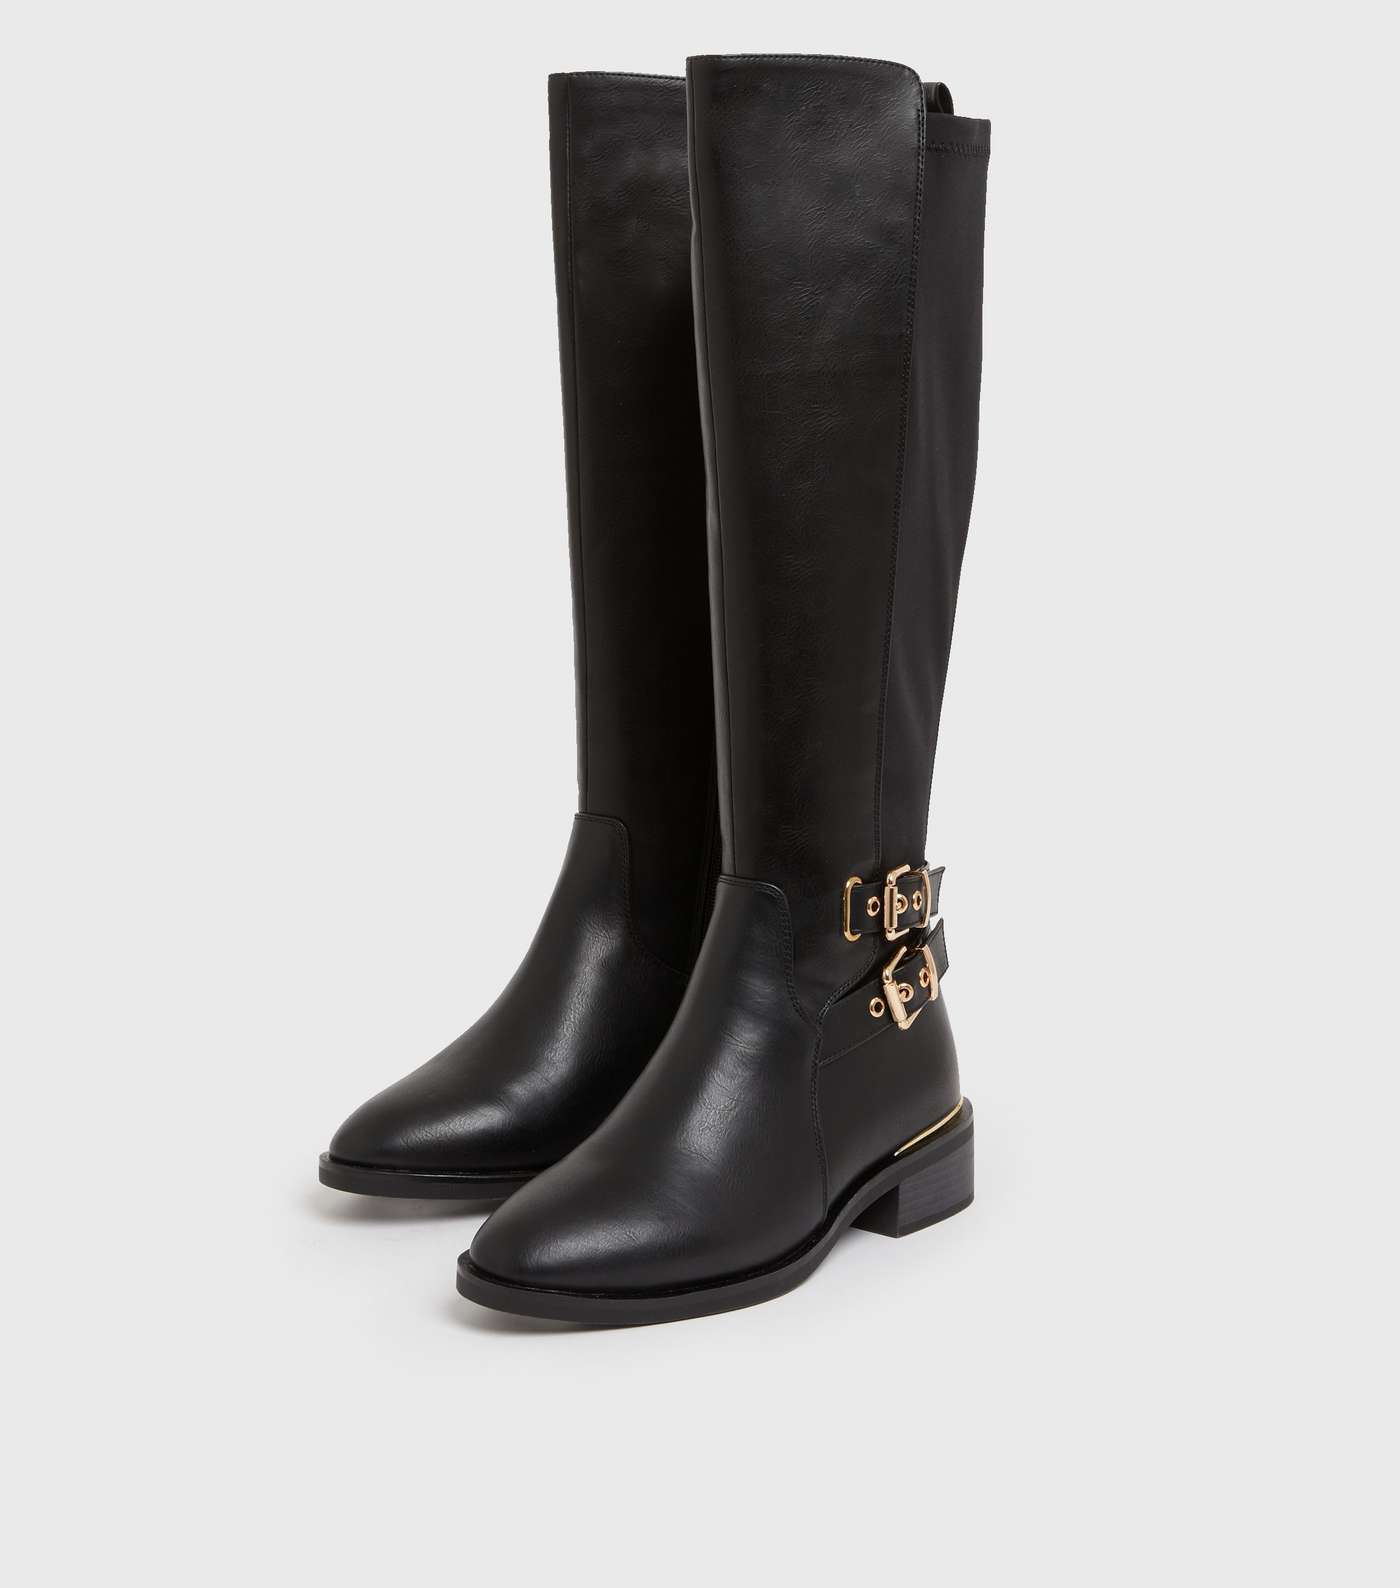 Wide Fit Extra Calf Fitting Black Leather-Look Buckle Knee High Boots Image 4